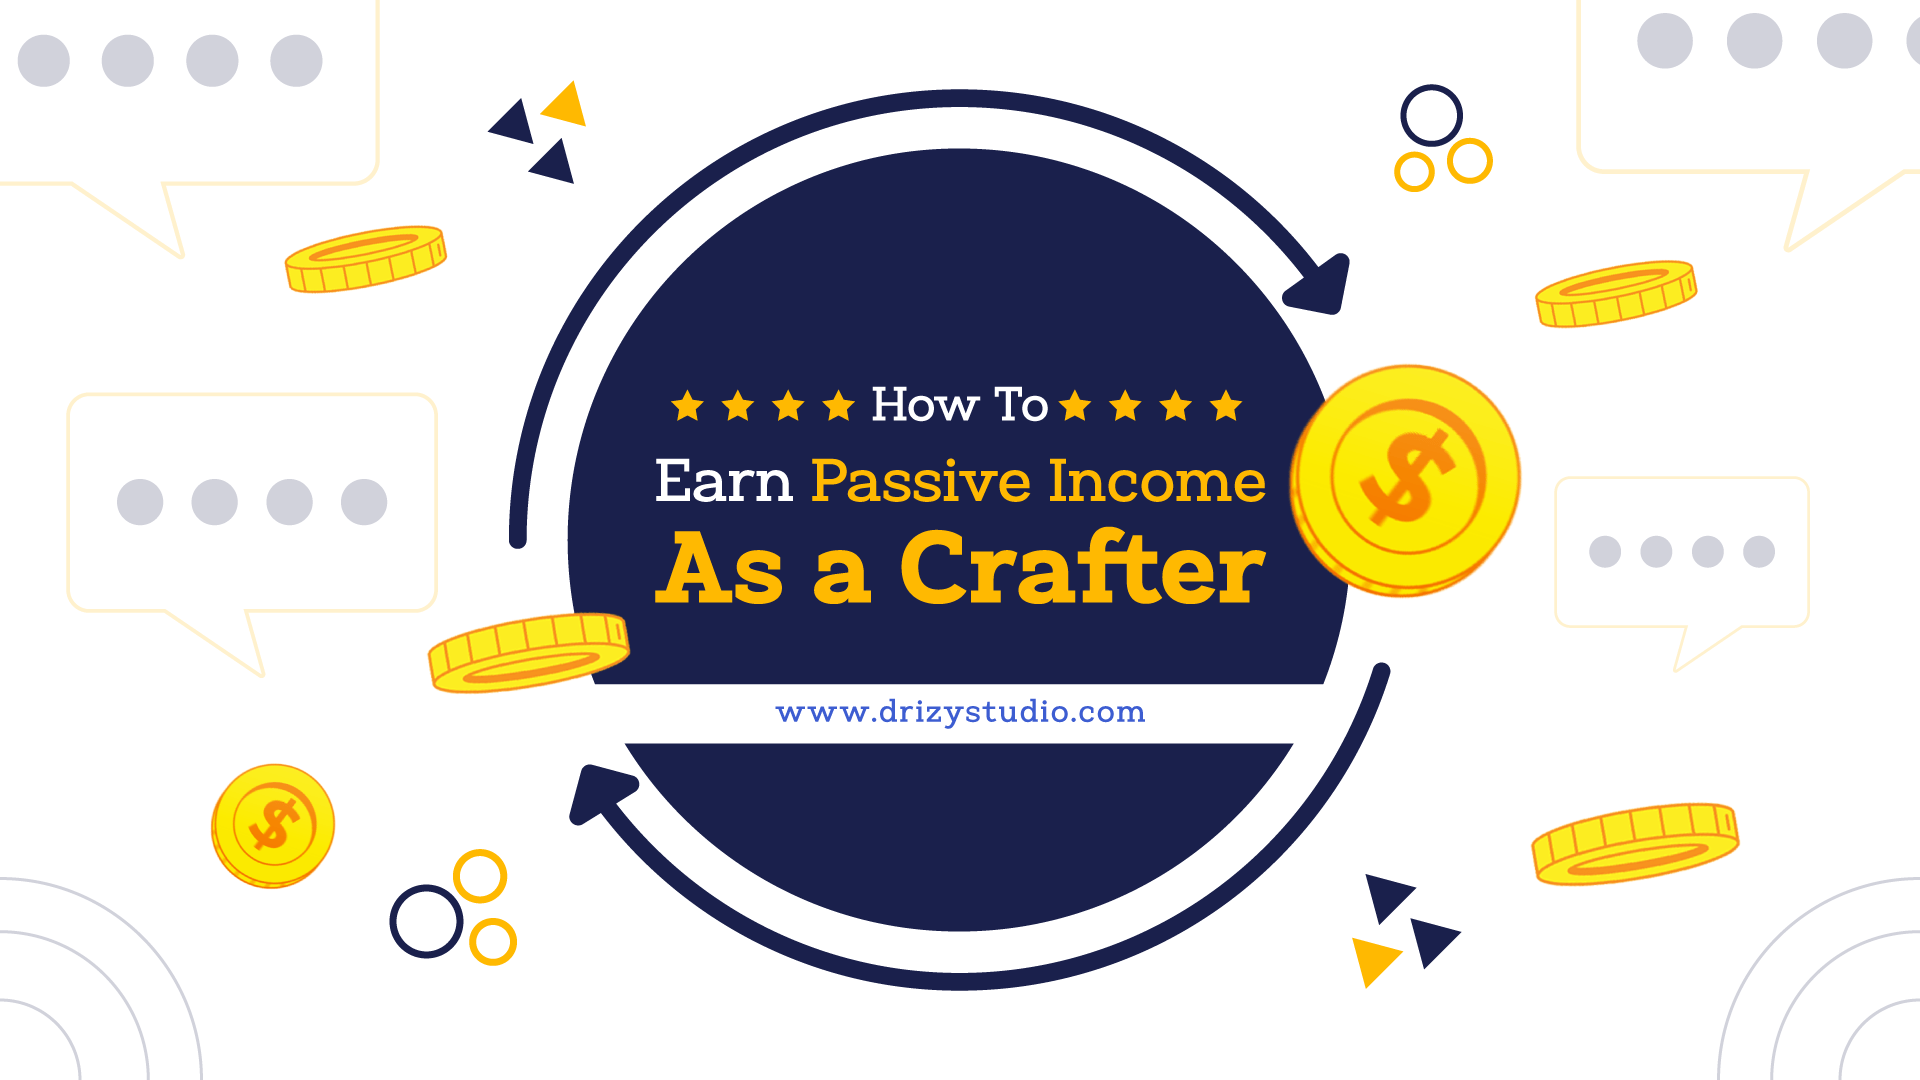 How to Earn Passive Income as a Crafter